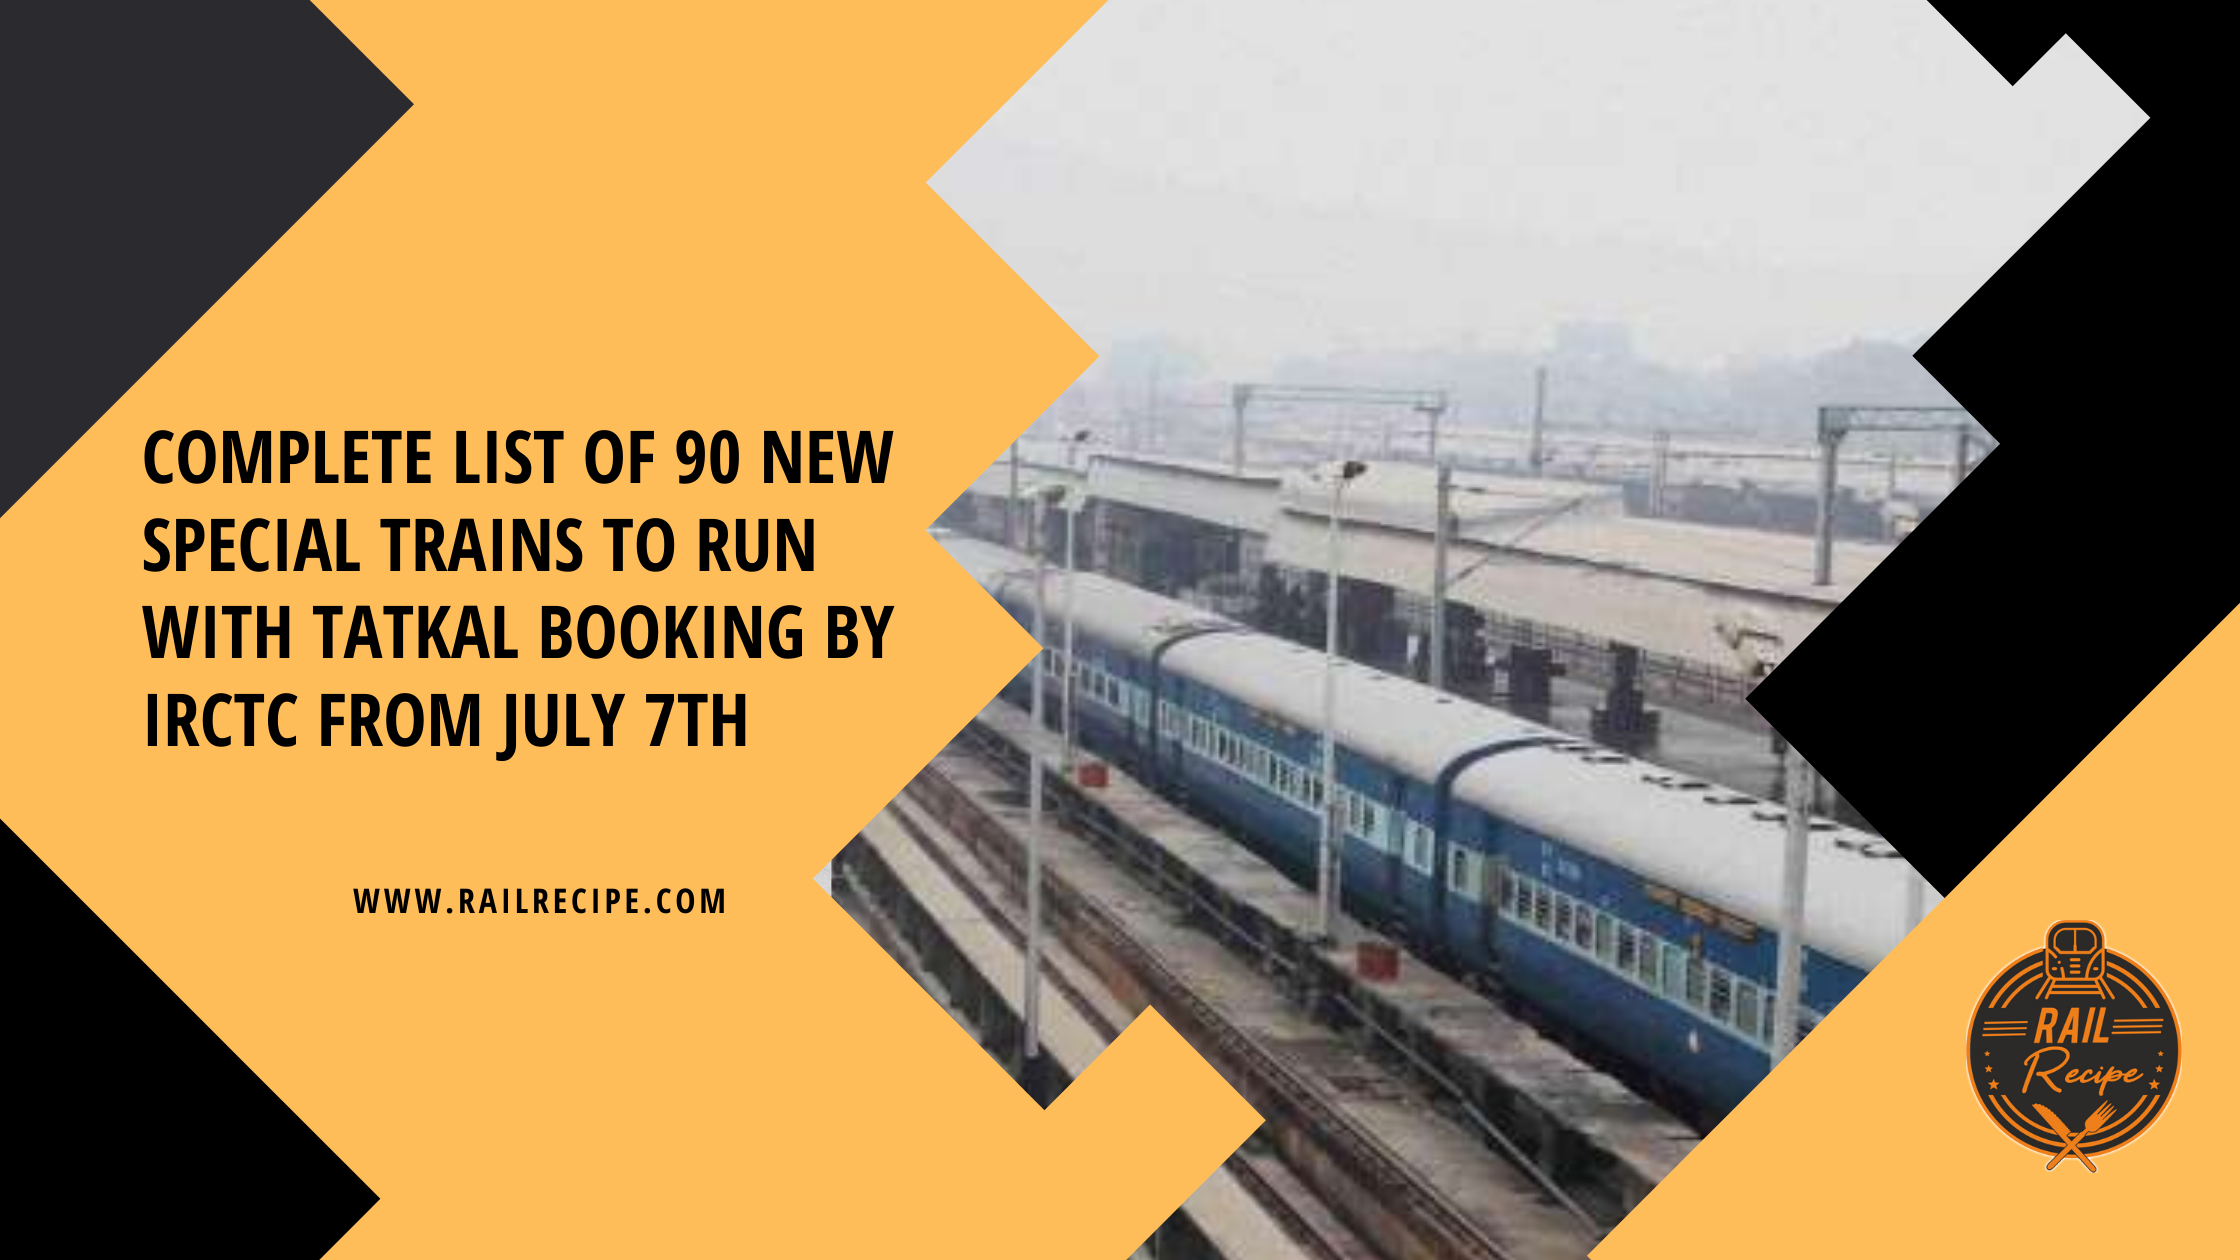 Complete List of 90 New Special Trains to Run With Tatkal Booking By IRCTC From July 7th